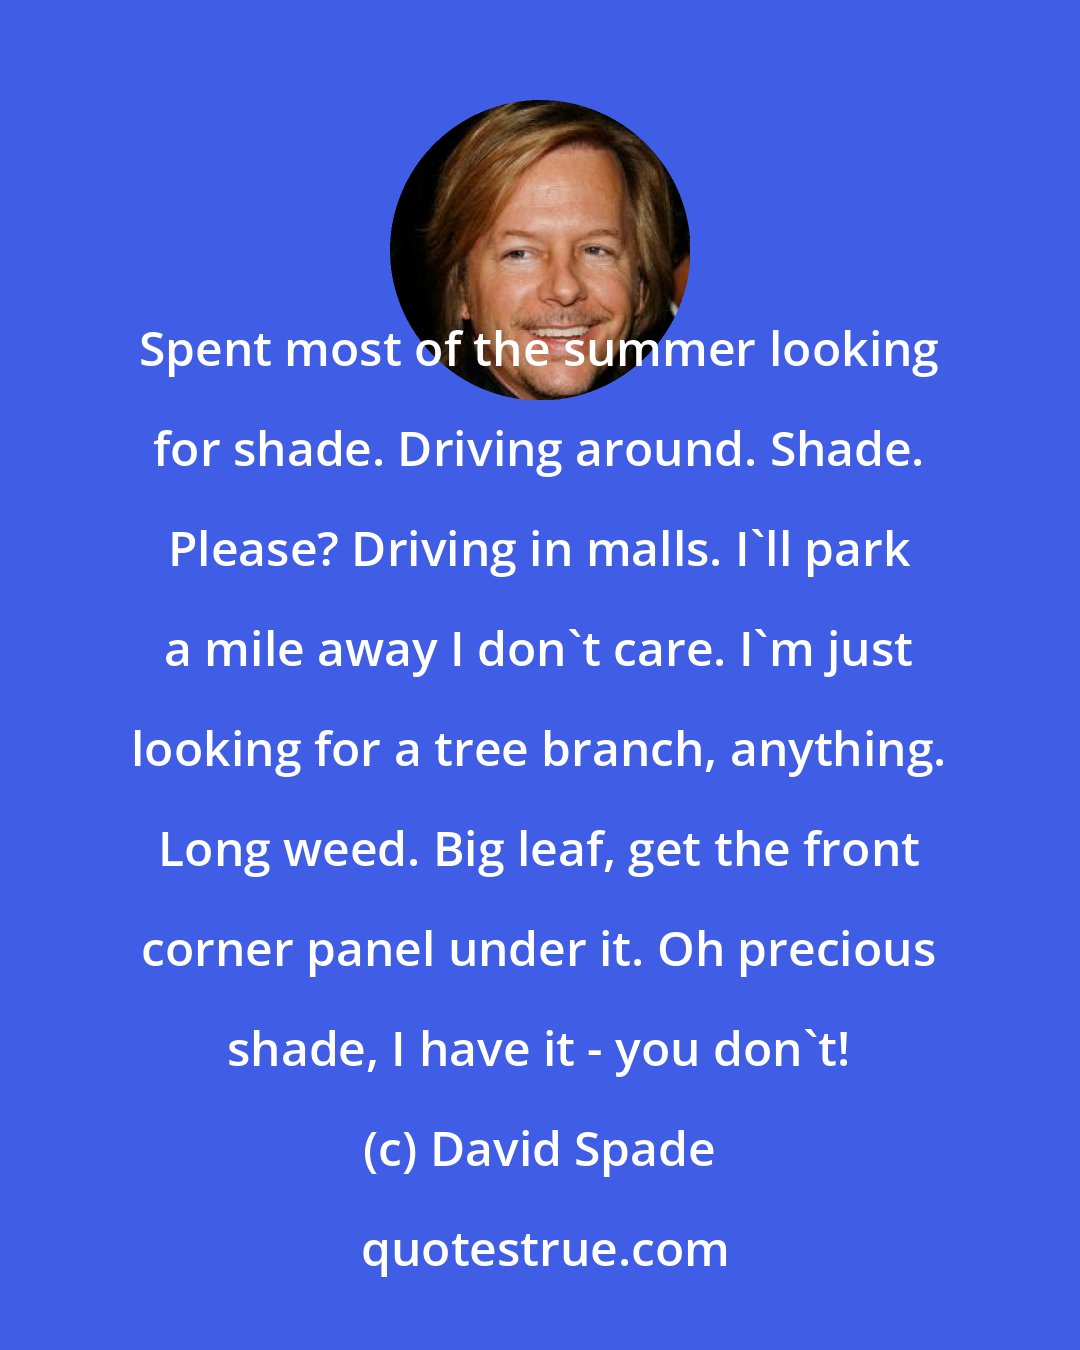 David Spade: Spent most of the summer looking for shade. Driving around. Shade. Please? Driving in malls. I'll park a mile away I don't care. I'm just looking for a tree branch, anything. Long weed. Big leaf, get the front corner panel under it. Oh precious shade, I have it - you don't!